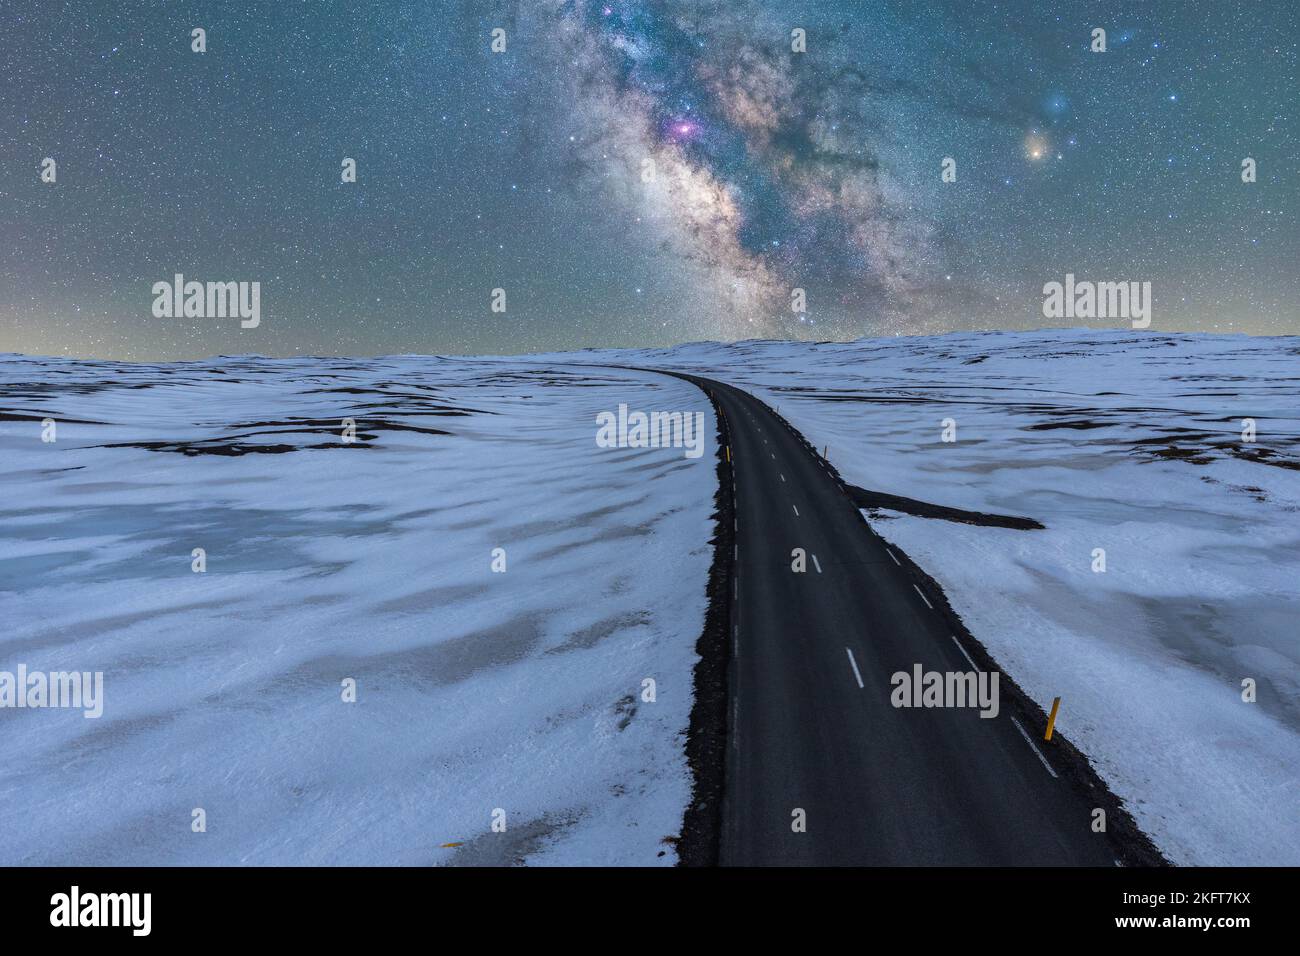 Drone view of endless narrow road going between frozen land under sparkling sky with galaxy Stock Photo